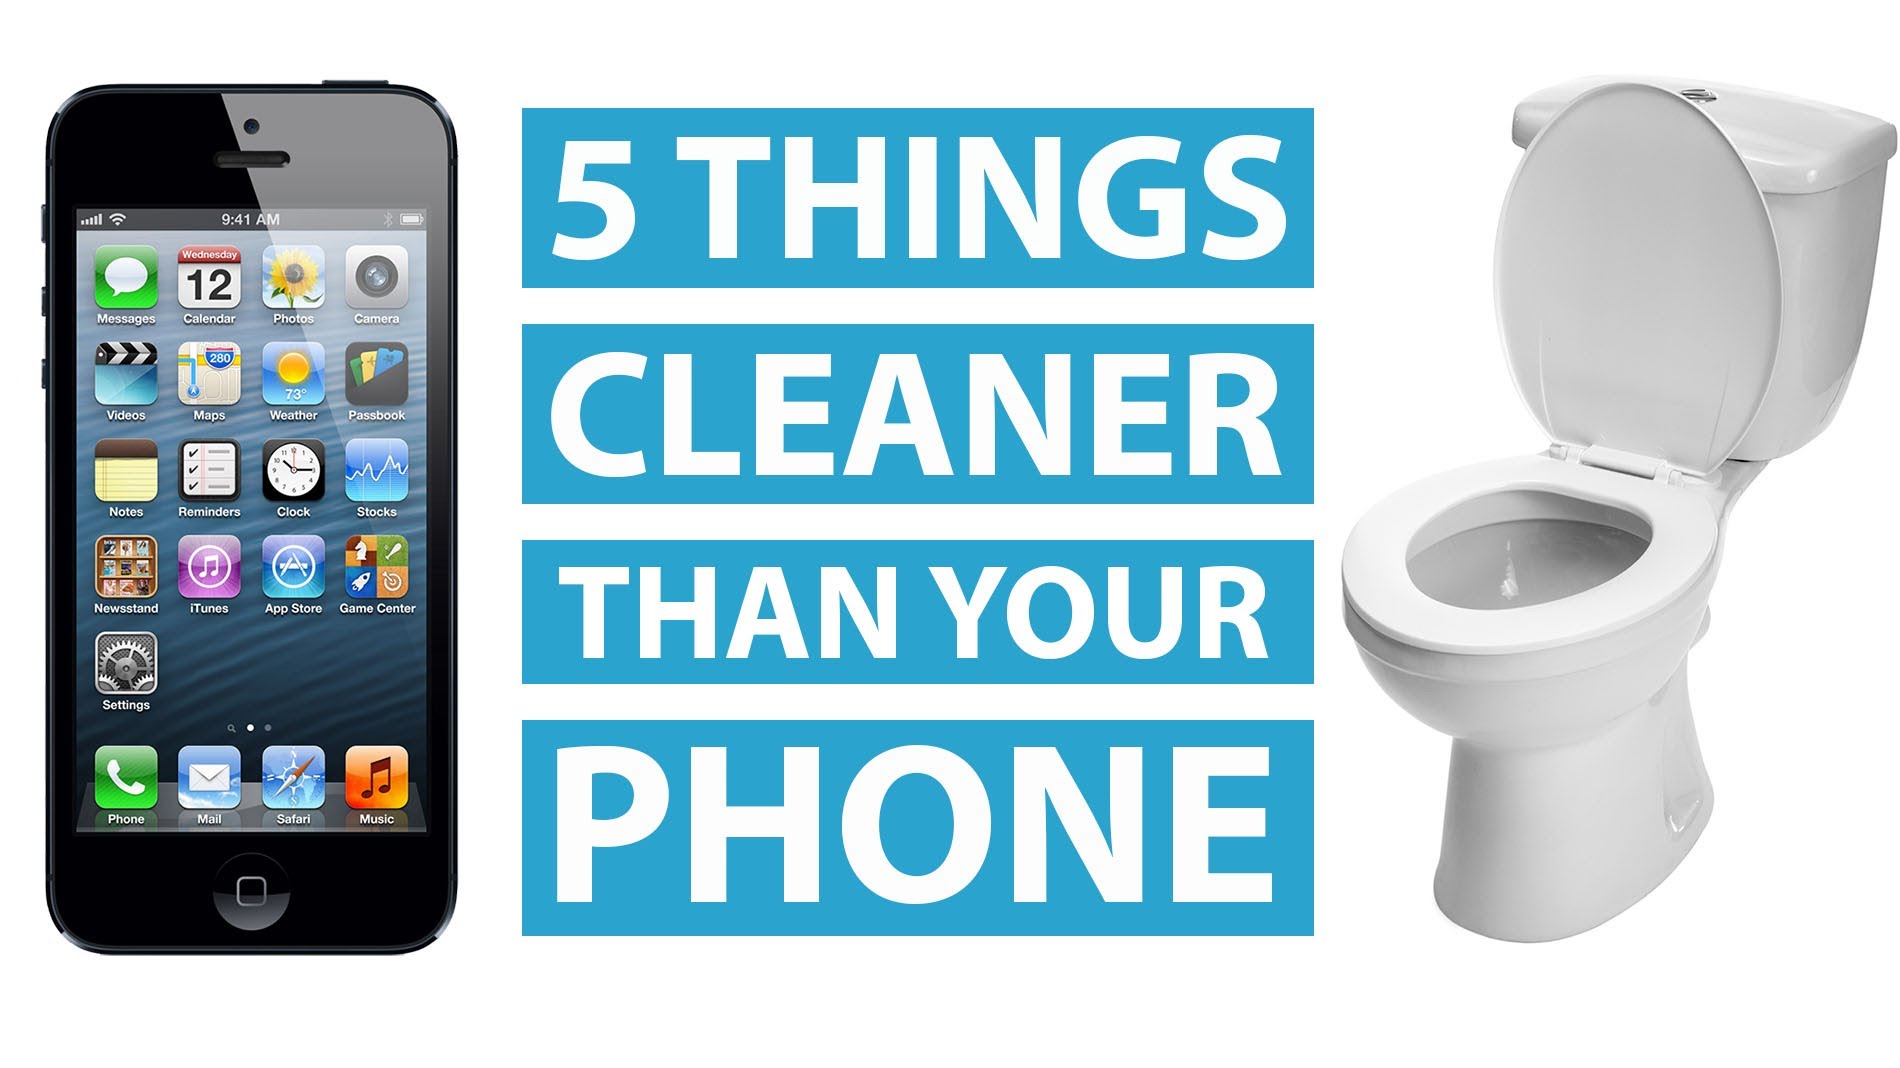 Clean your Phone. Clean your Phone game. You need to clean your Phone Alert. Dirty things. Dirty than